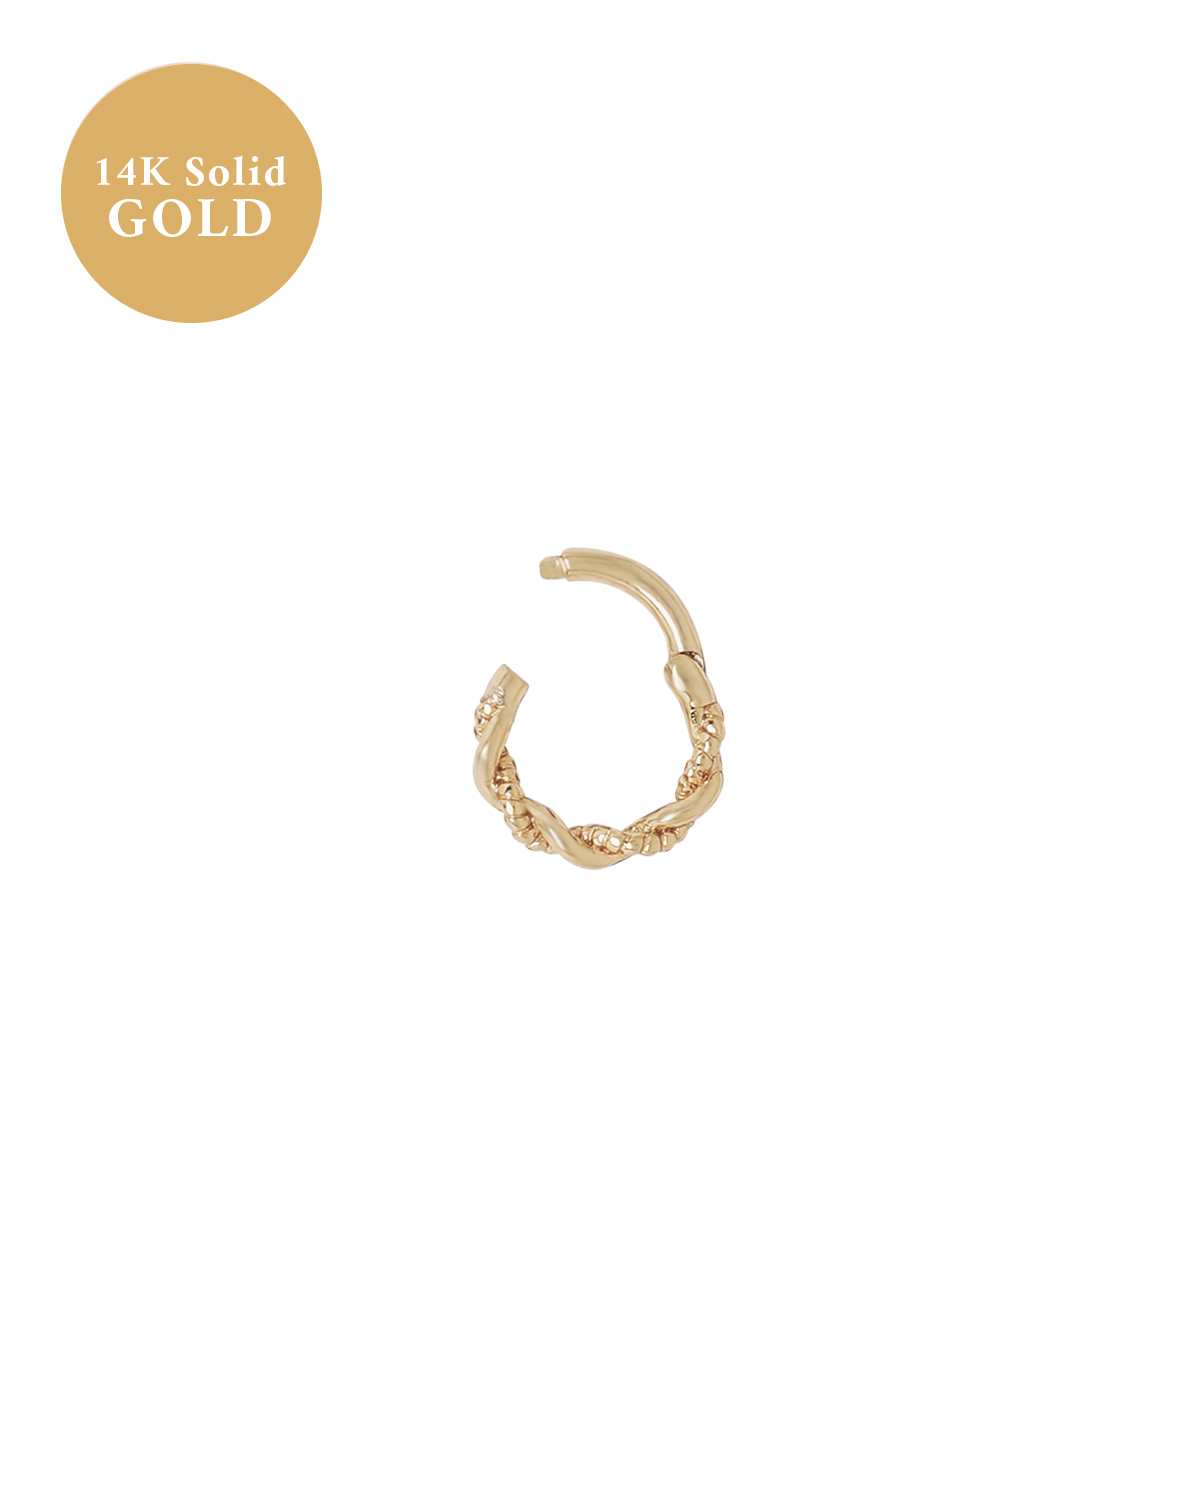 14K Solid Gold Merida Small Curled Hoop